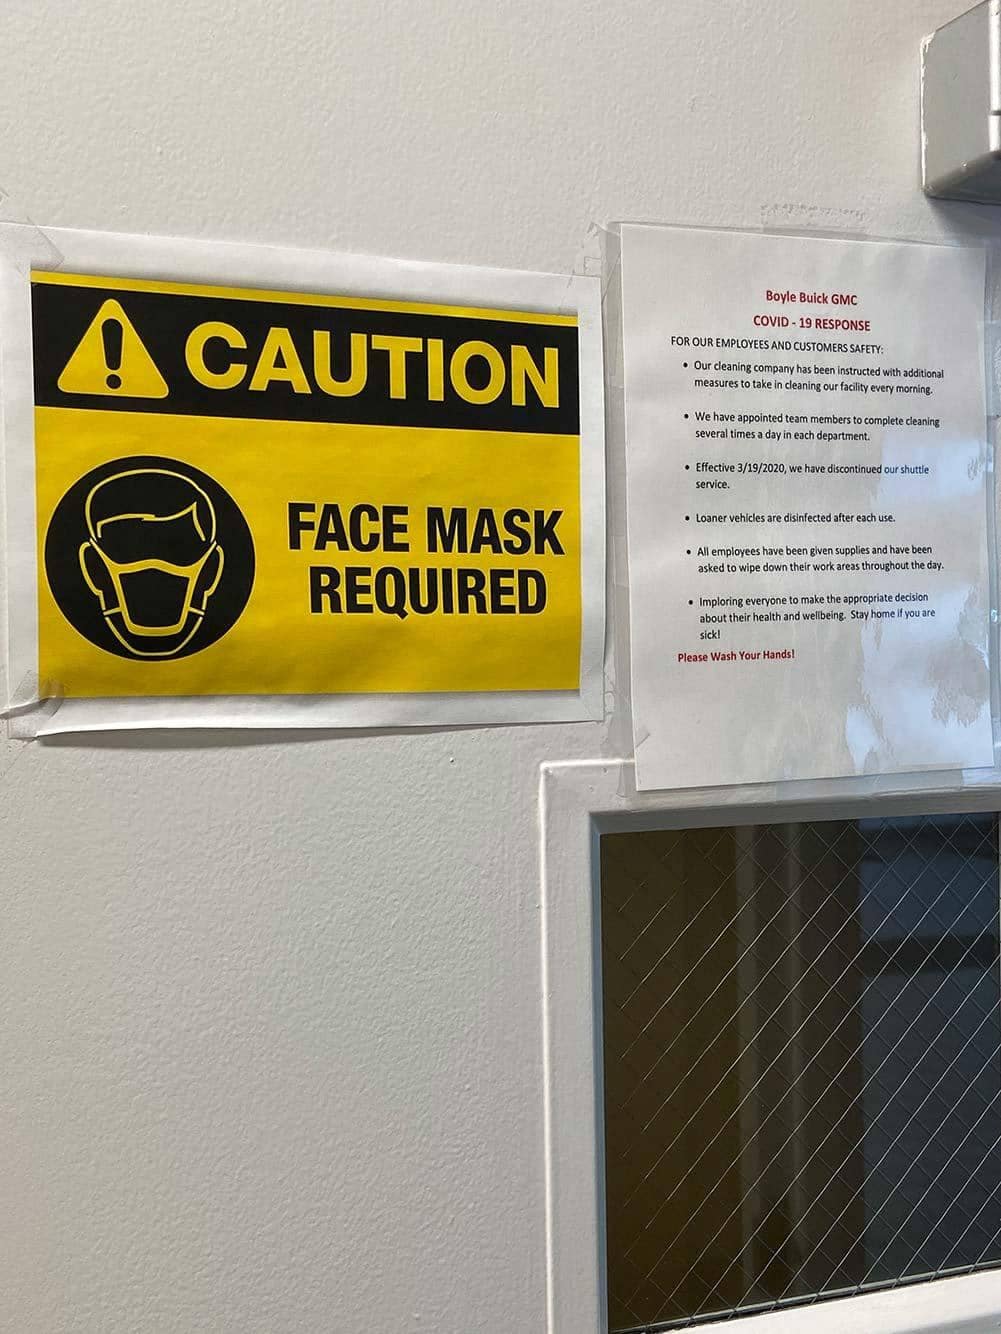 Mask Required sign